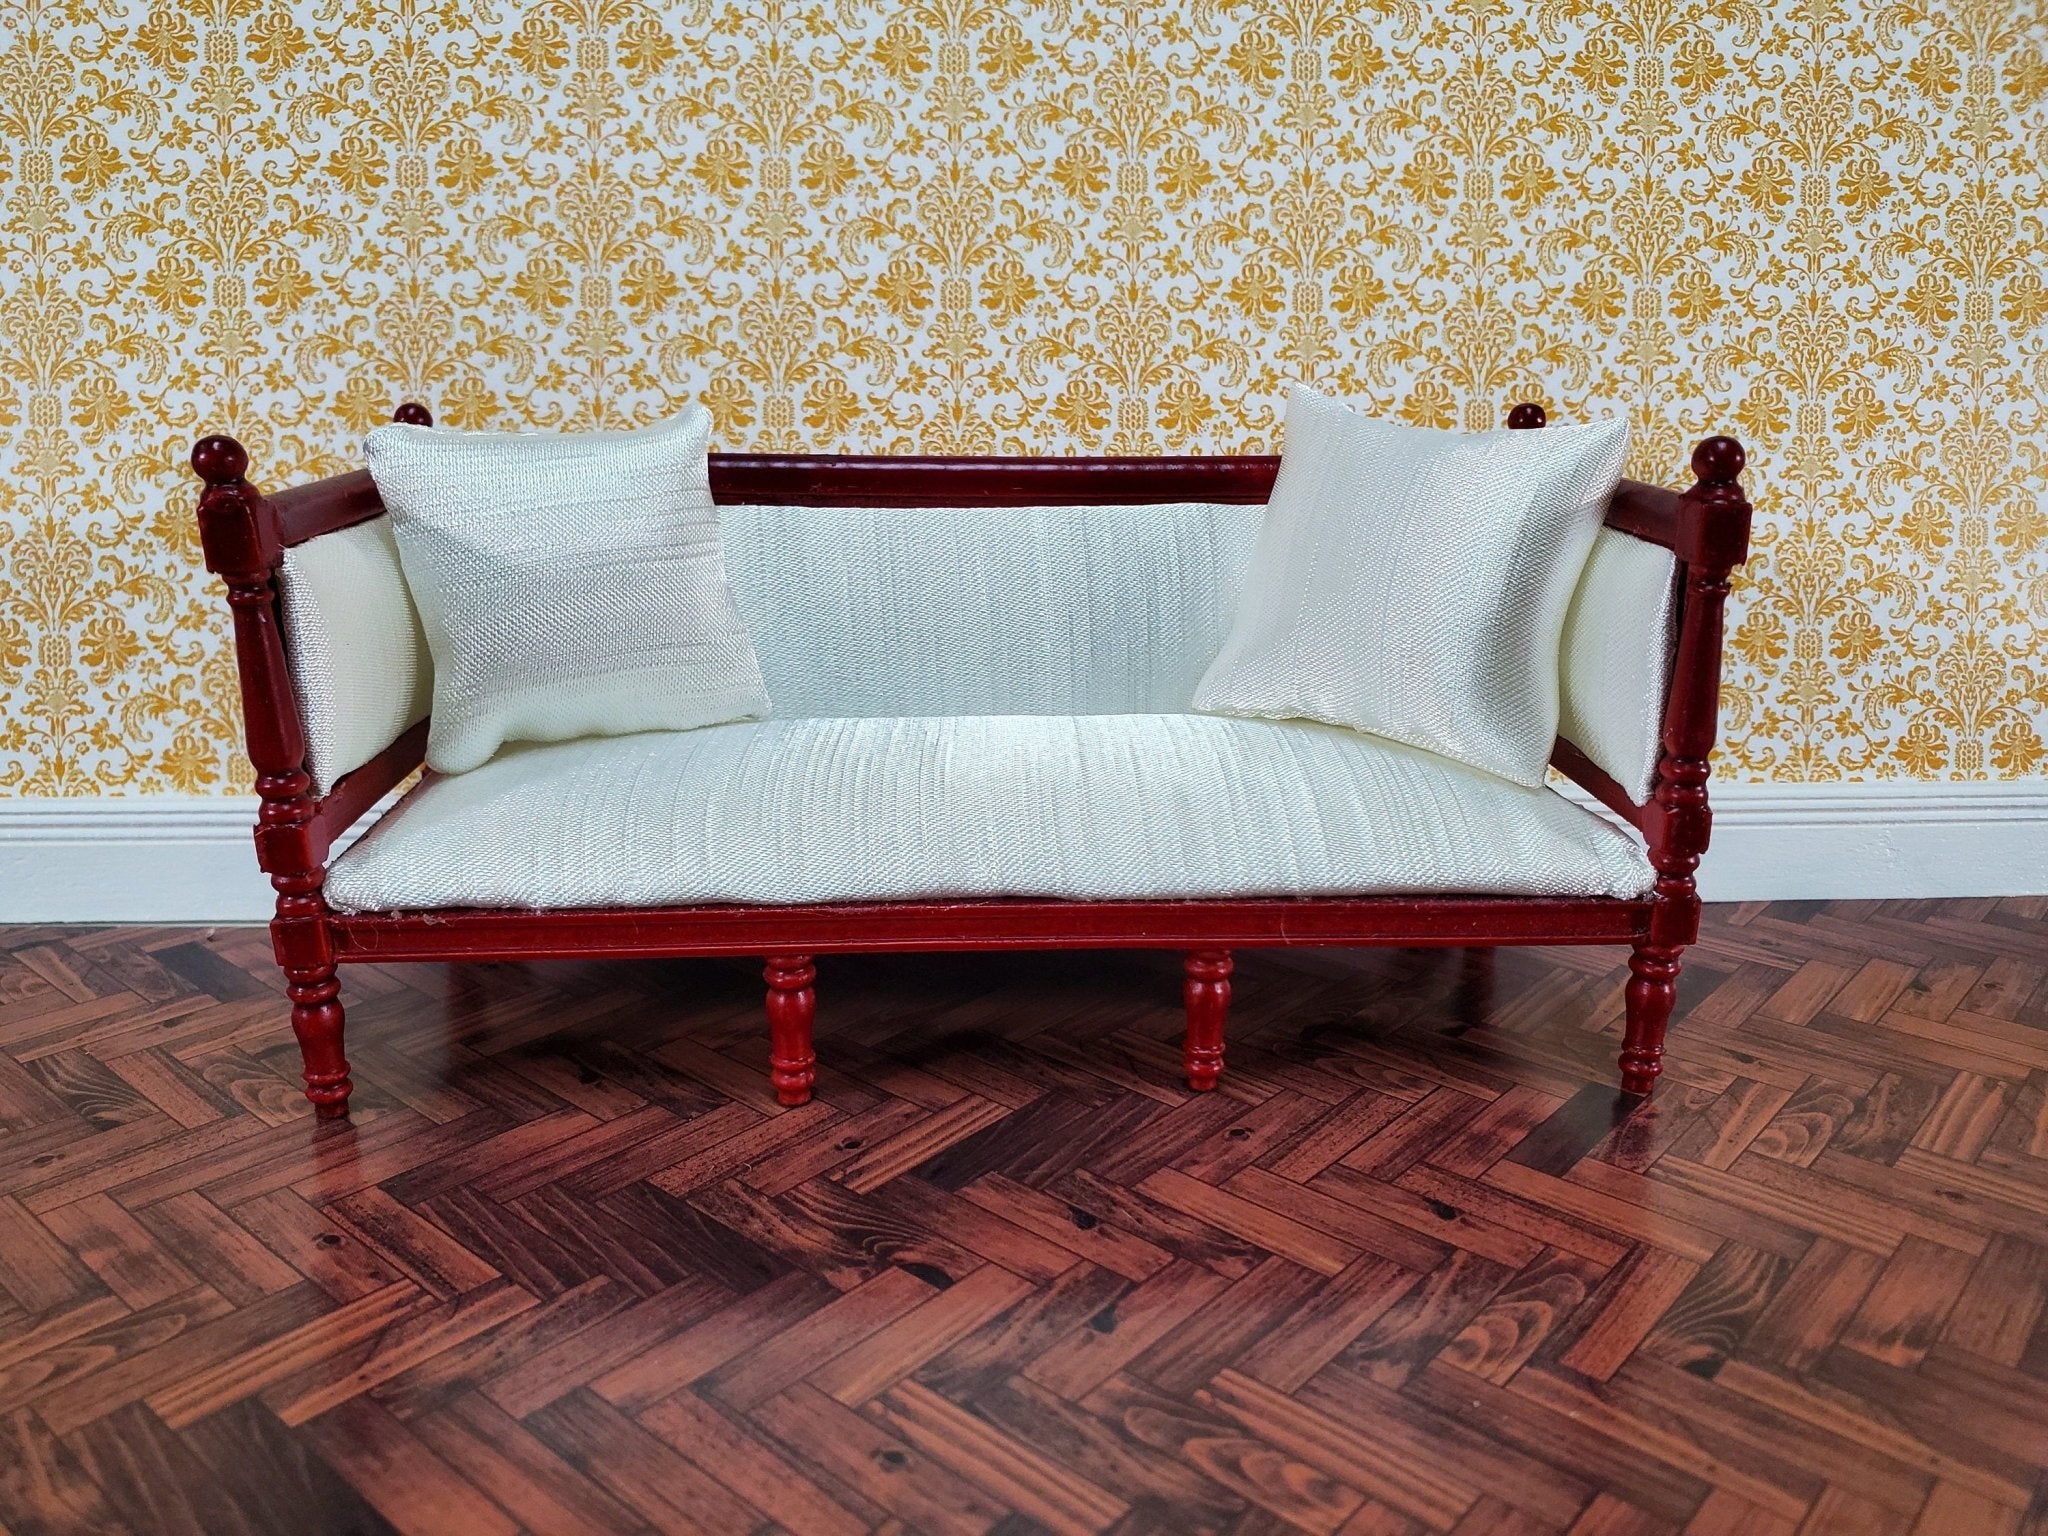 Dollhouse PRINTABLE FABRIC Miniature Red Ticking Upholstery